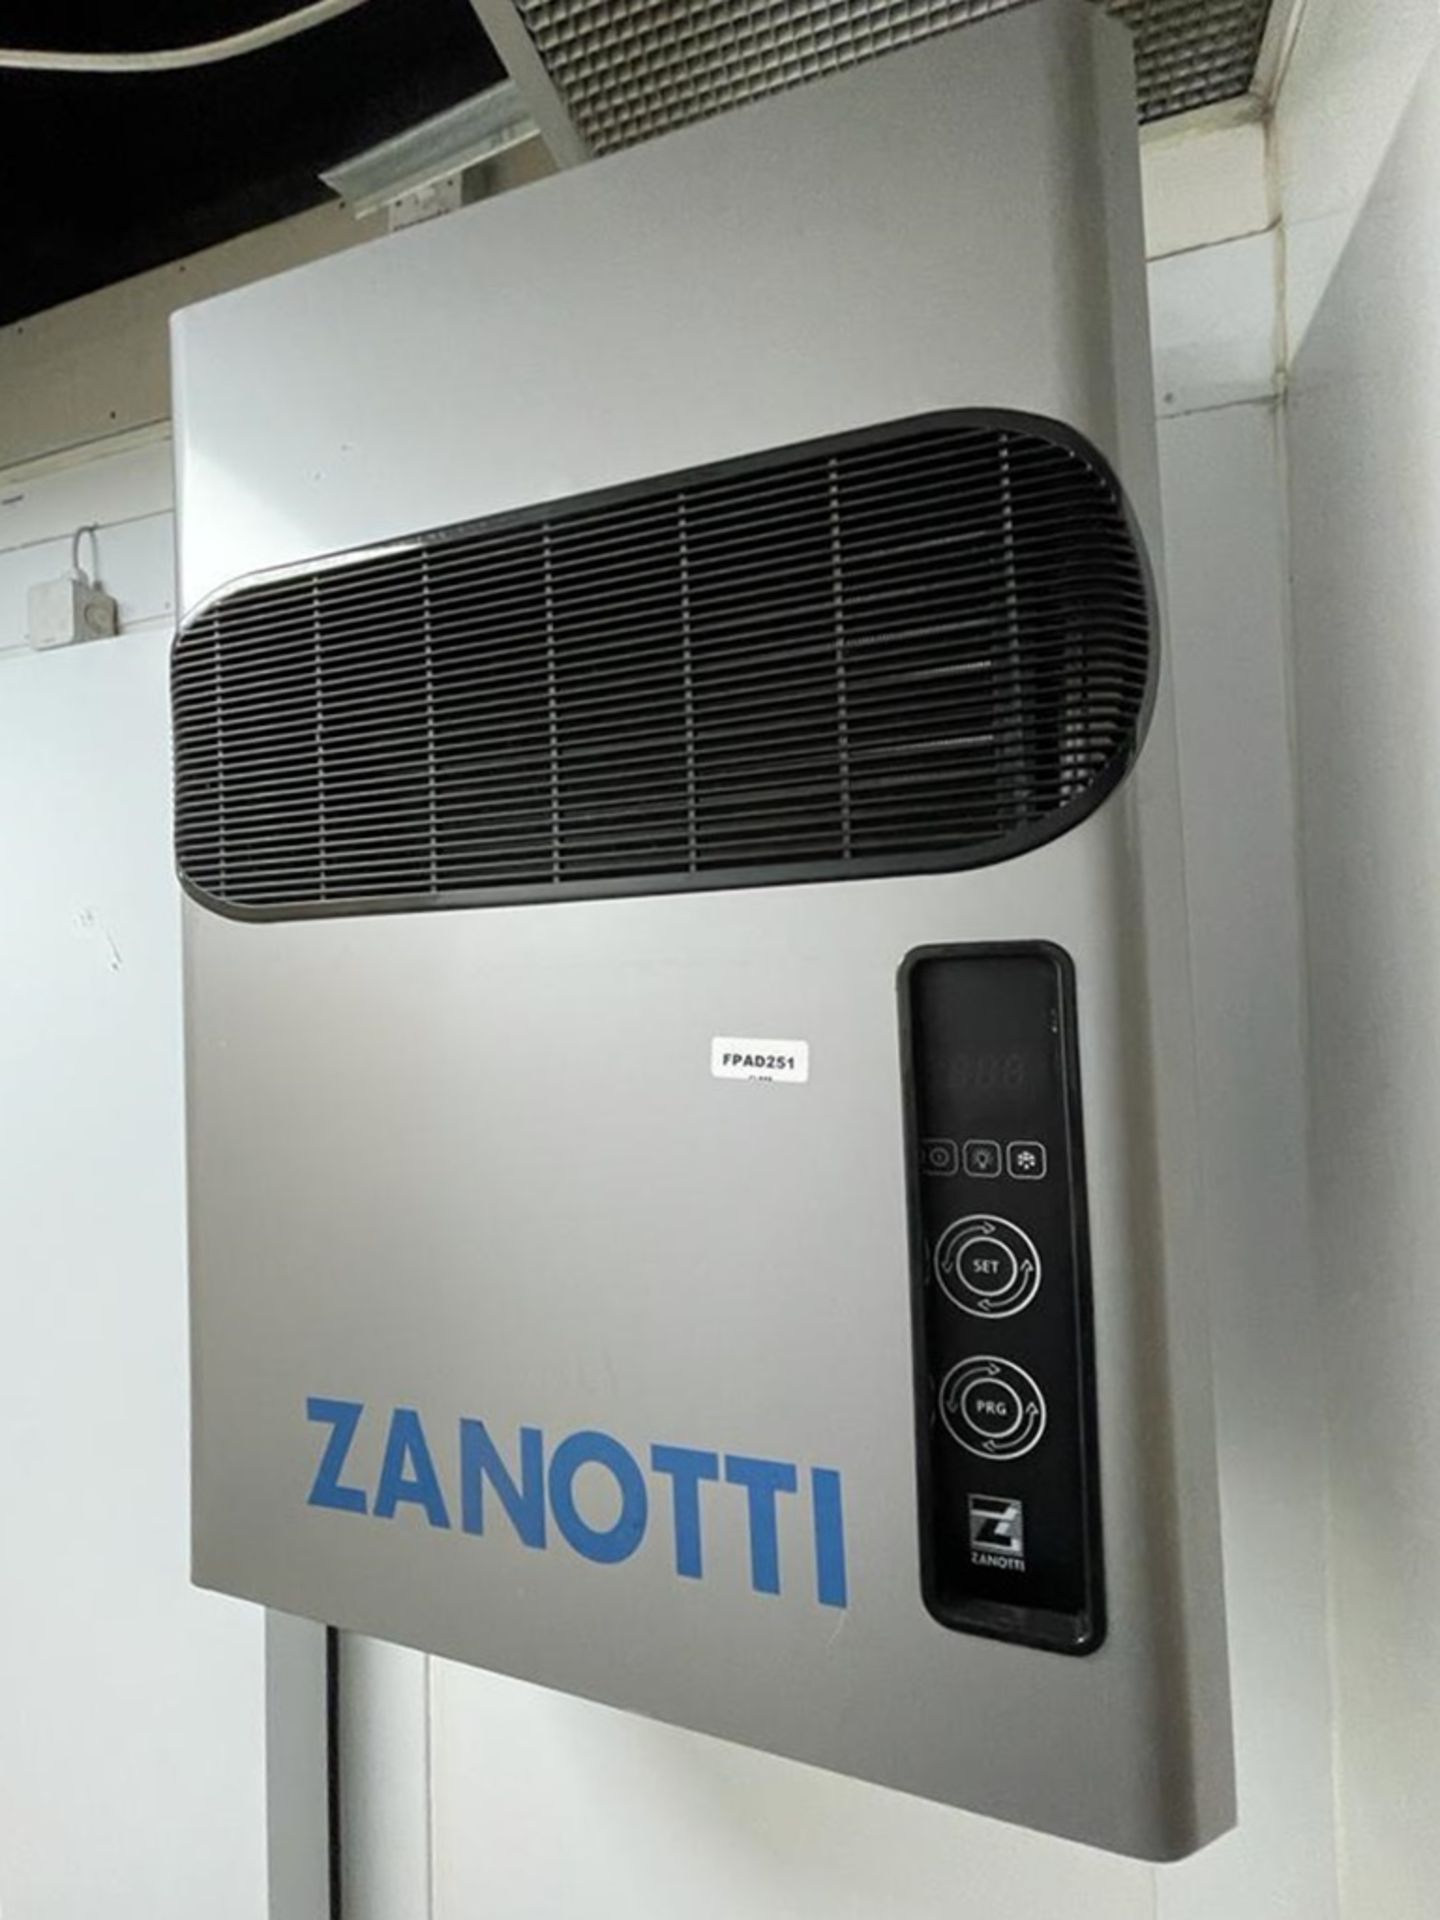 1 x Walk In Refrigerated Cold and Freezer With Zanotti Control Units - Ref: BK249 - CL686 - - Image 12 of 24